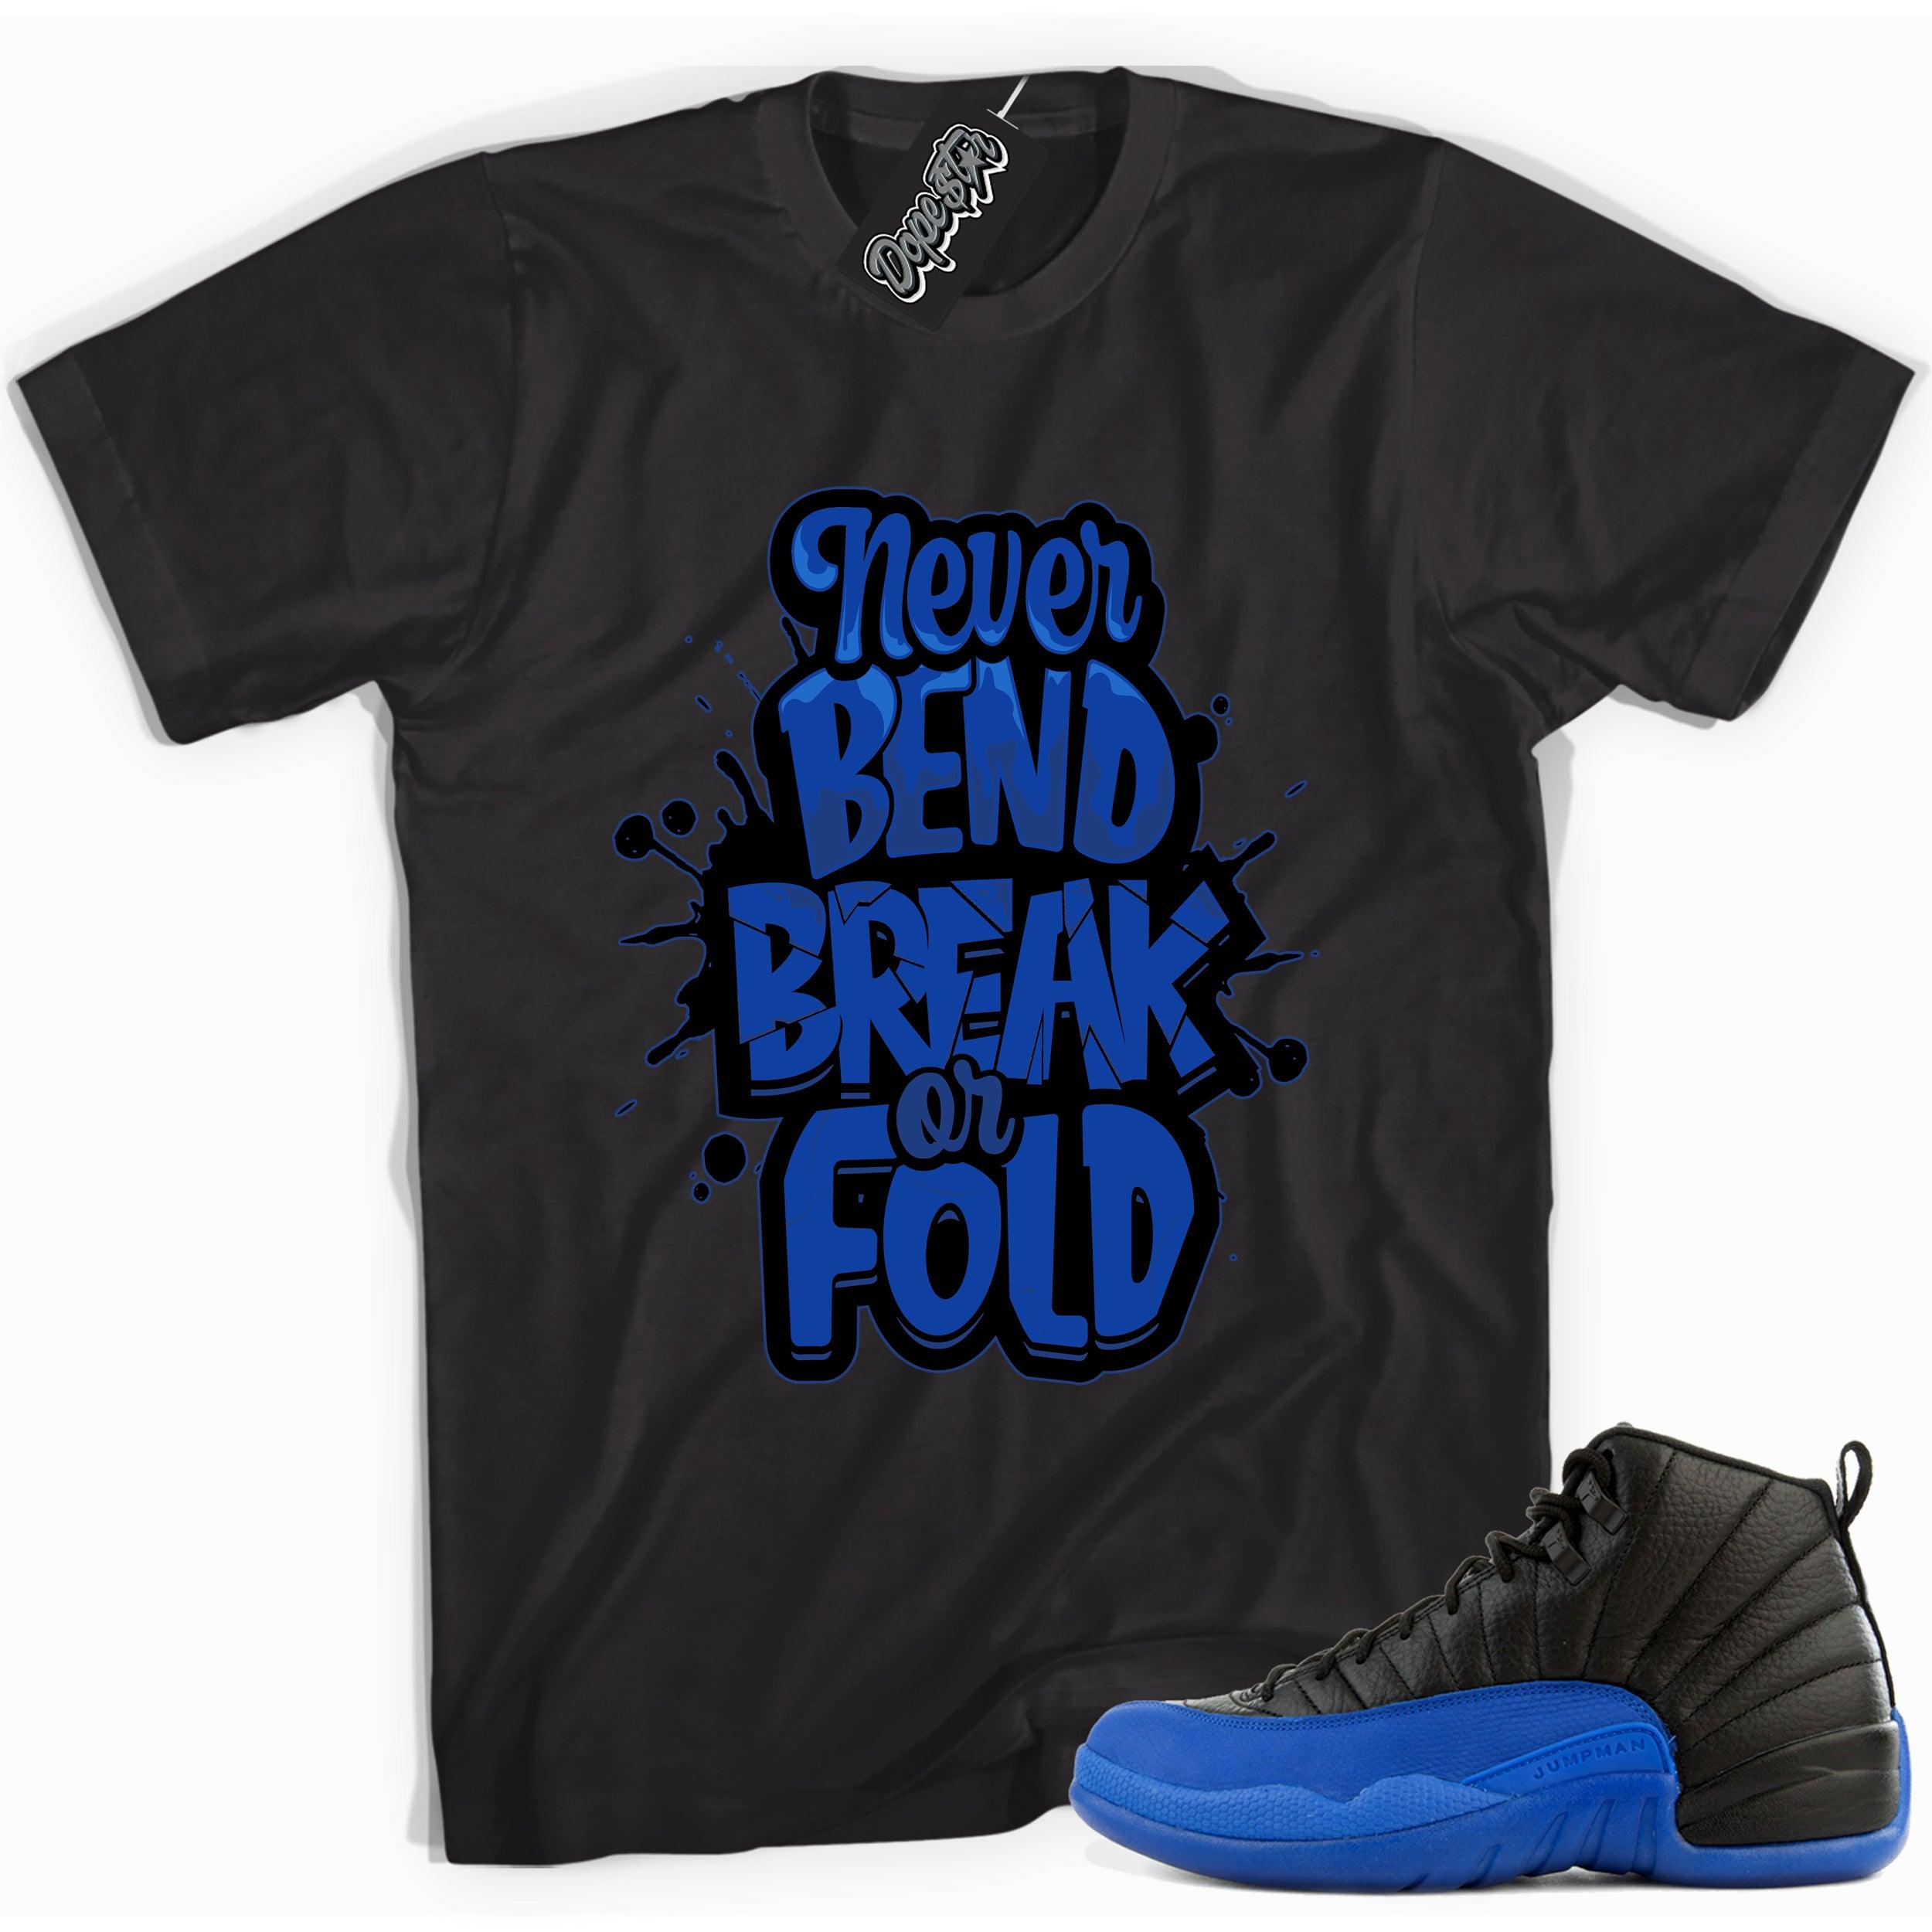 Cool black graphic tee with 'never bend break or fold' print, that perfectly matches  Air Jordan 12 Retro Black Game Royal sneakers.